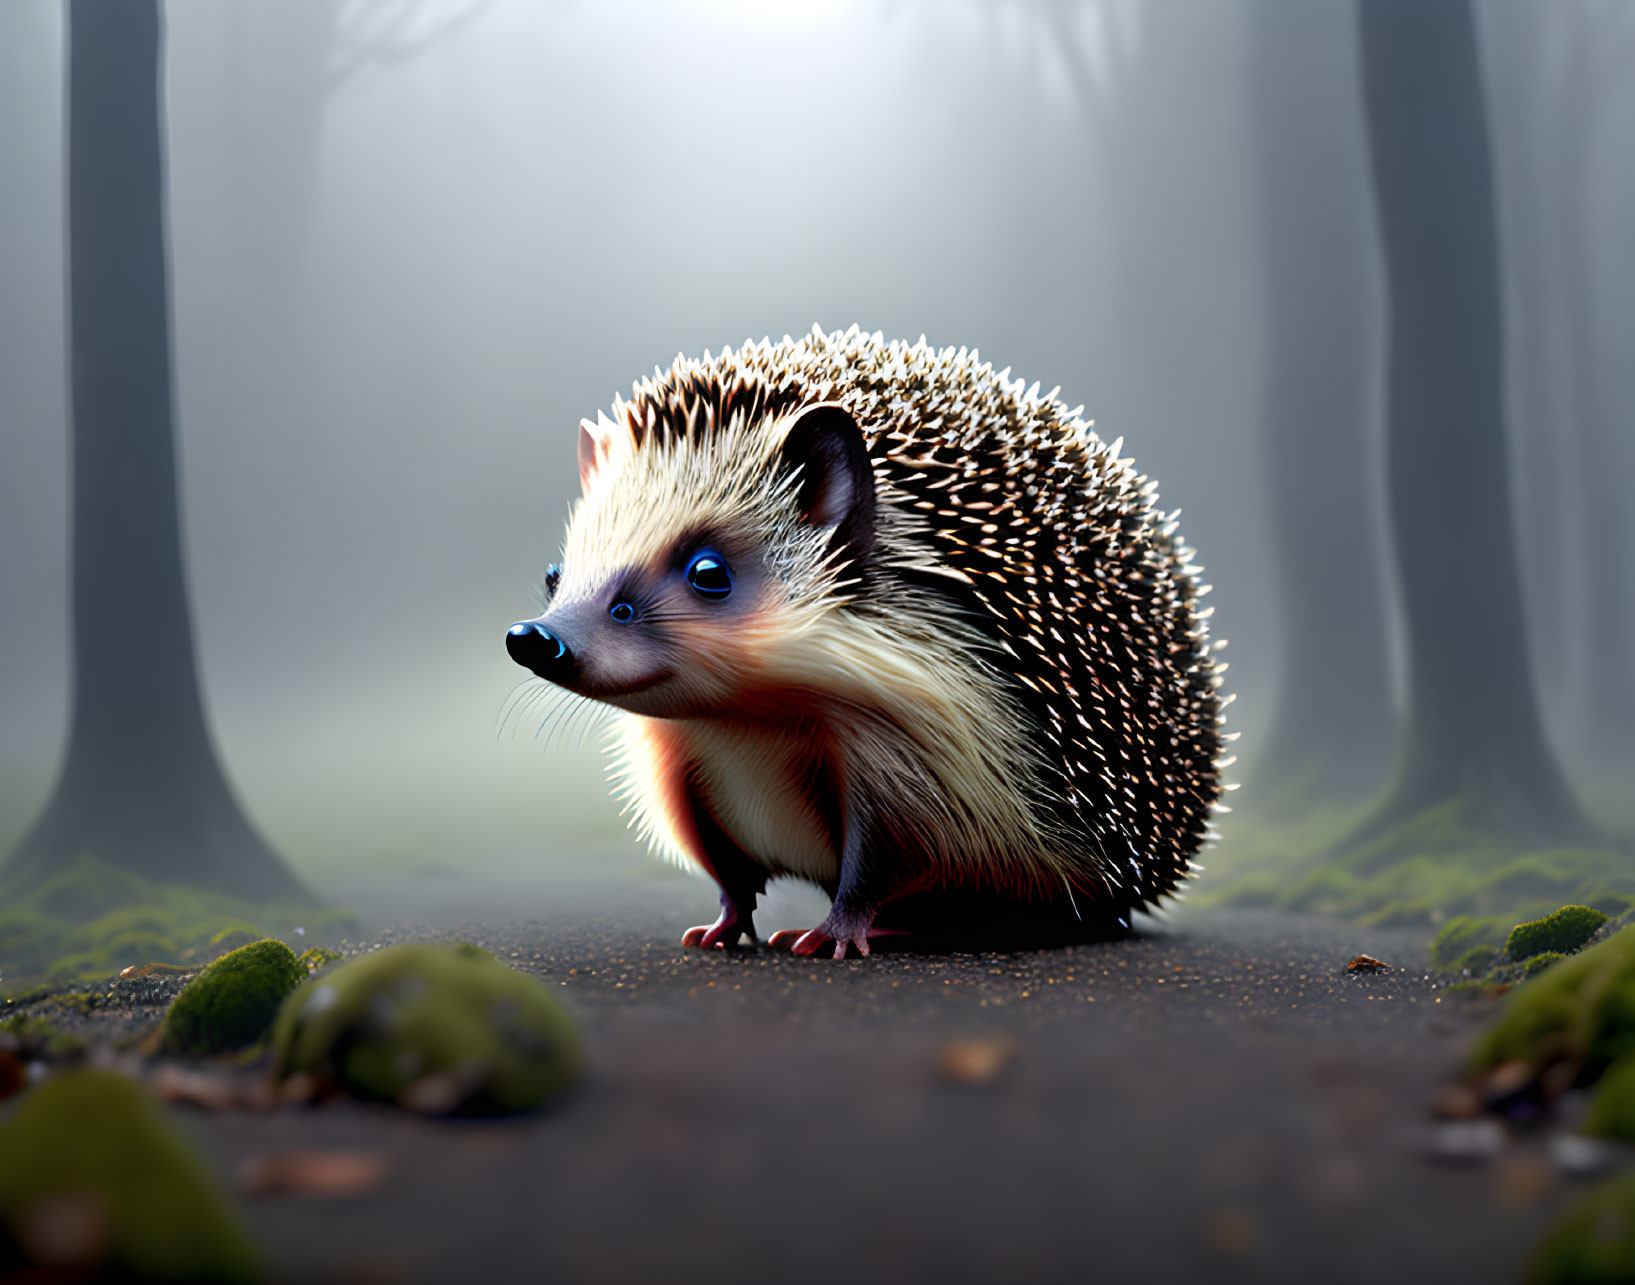 Adorable hedgehog in misty forest setting among trees and rocks